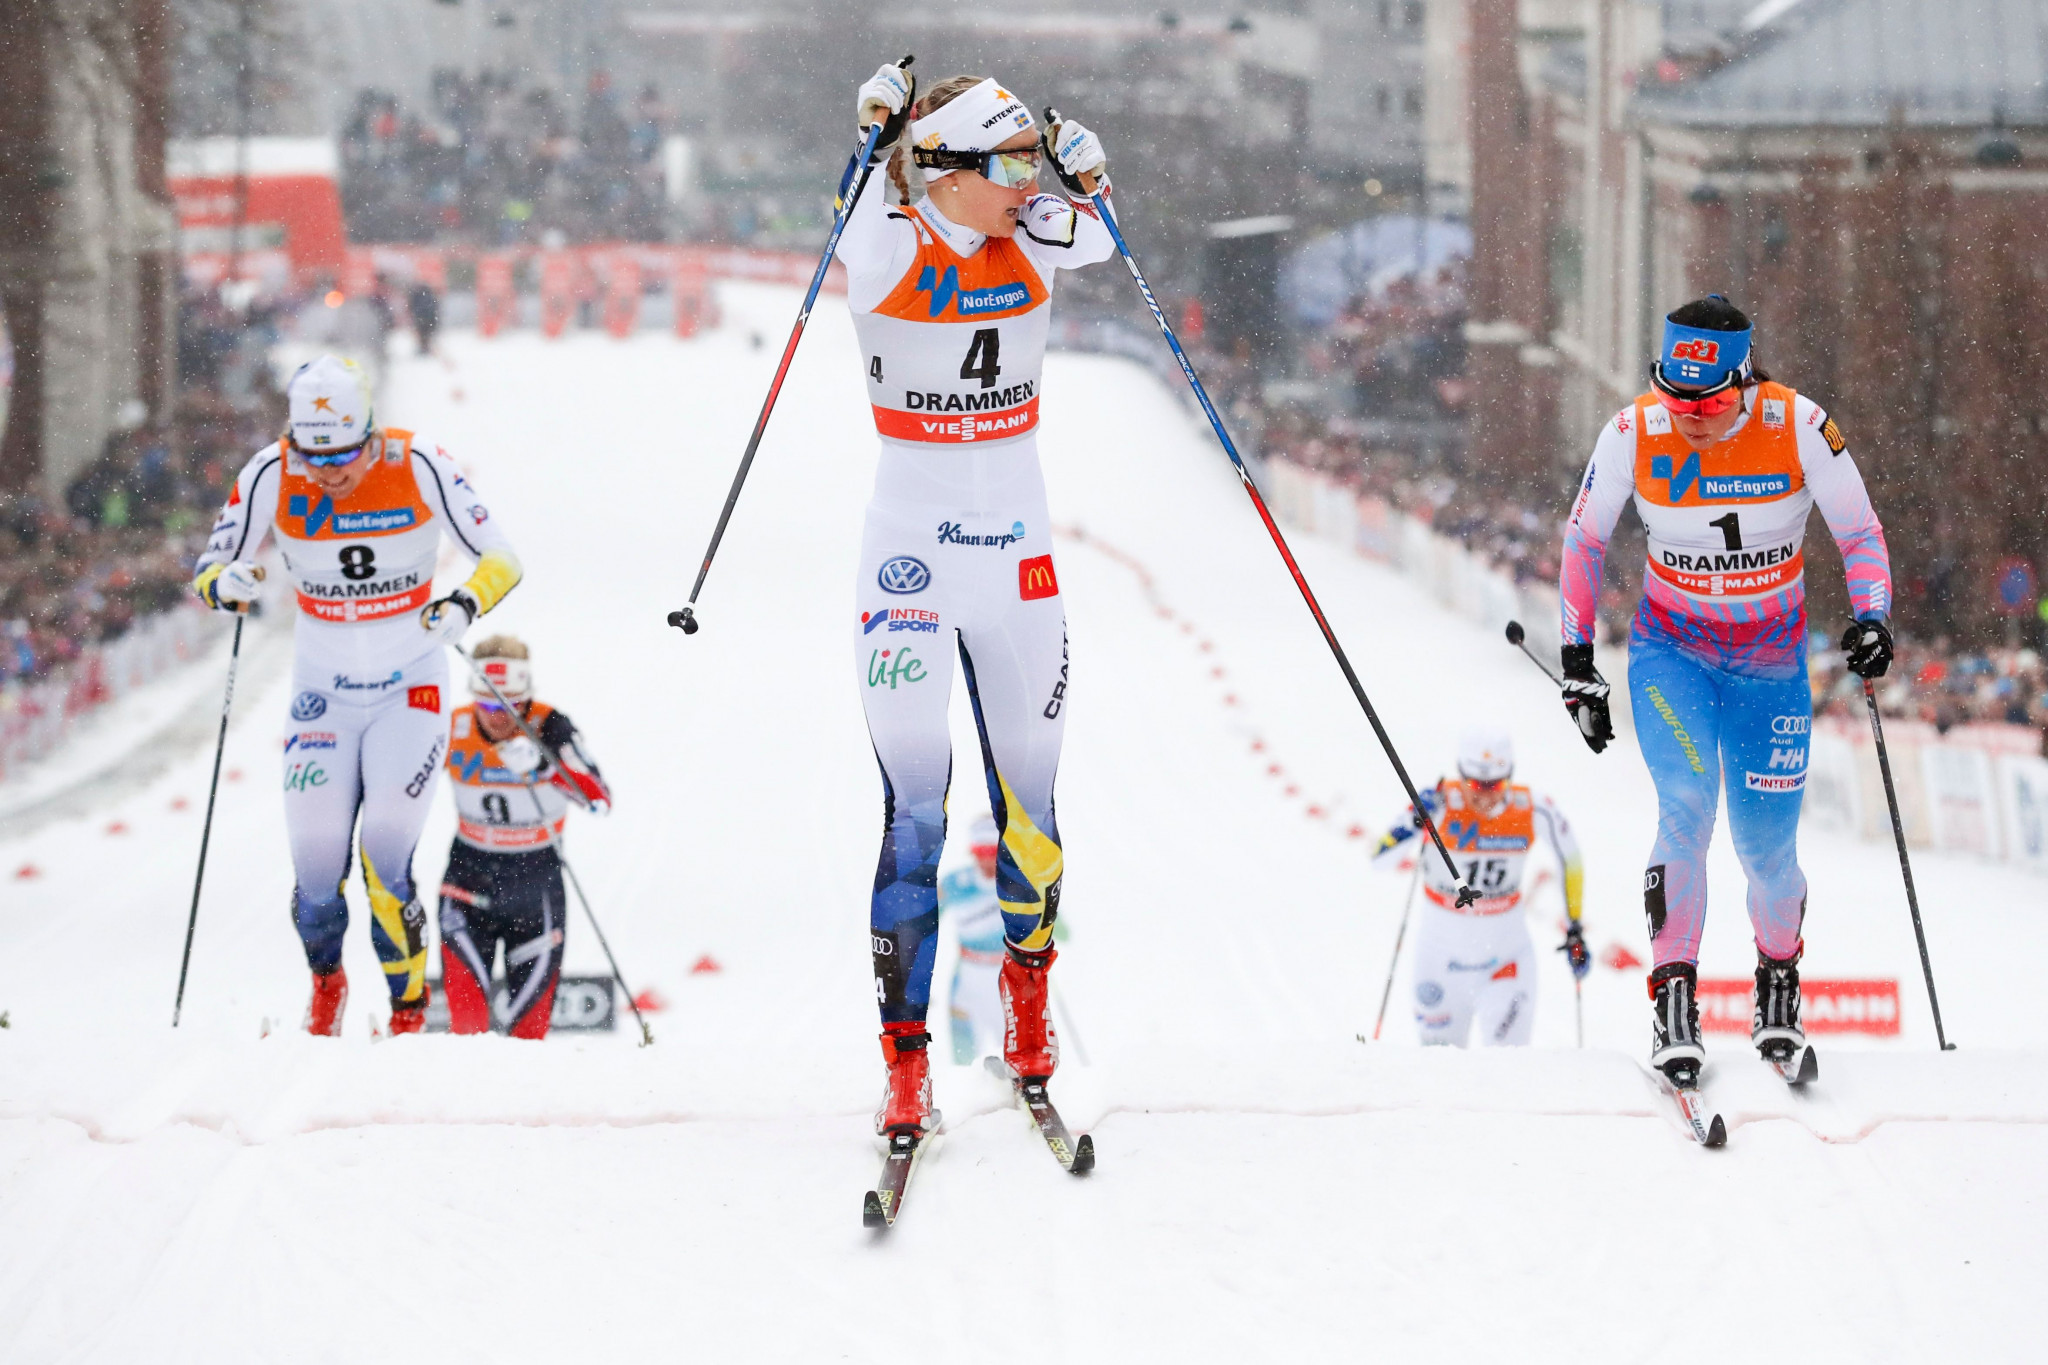 Nilsson seeking to return to winning FIS Cross-Country World Cup form in Davos